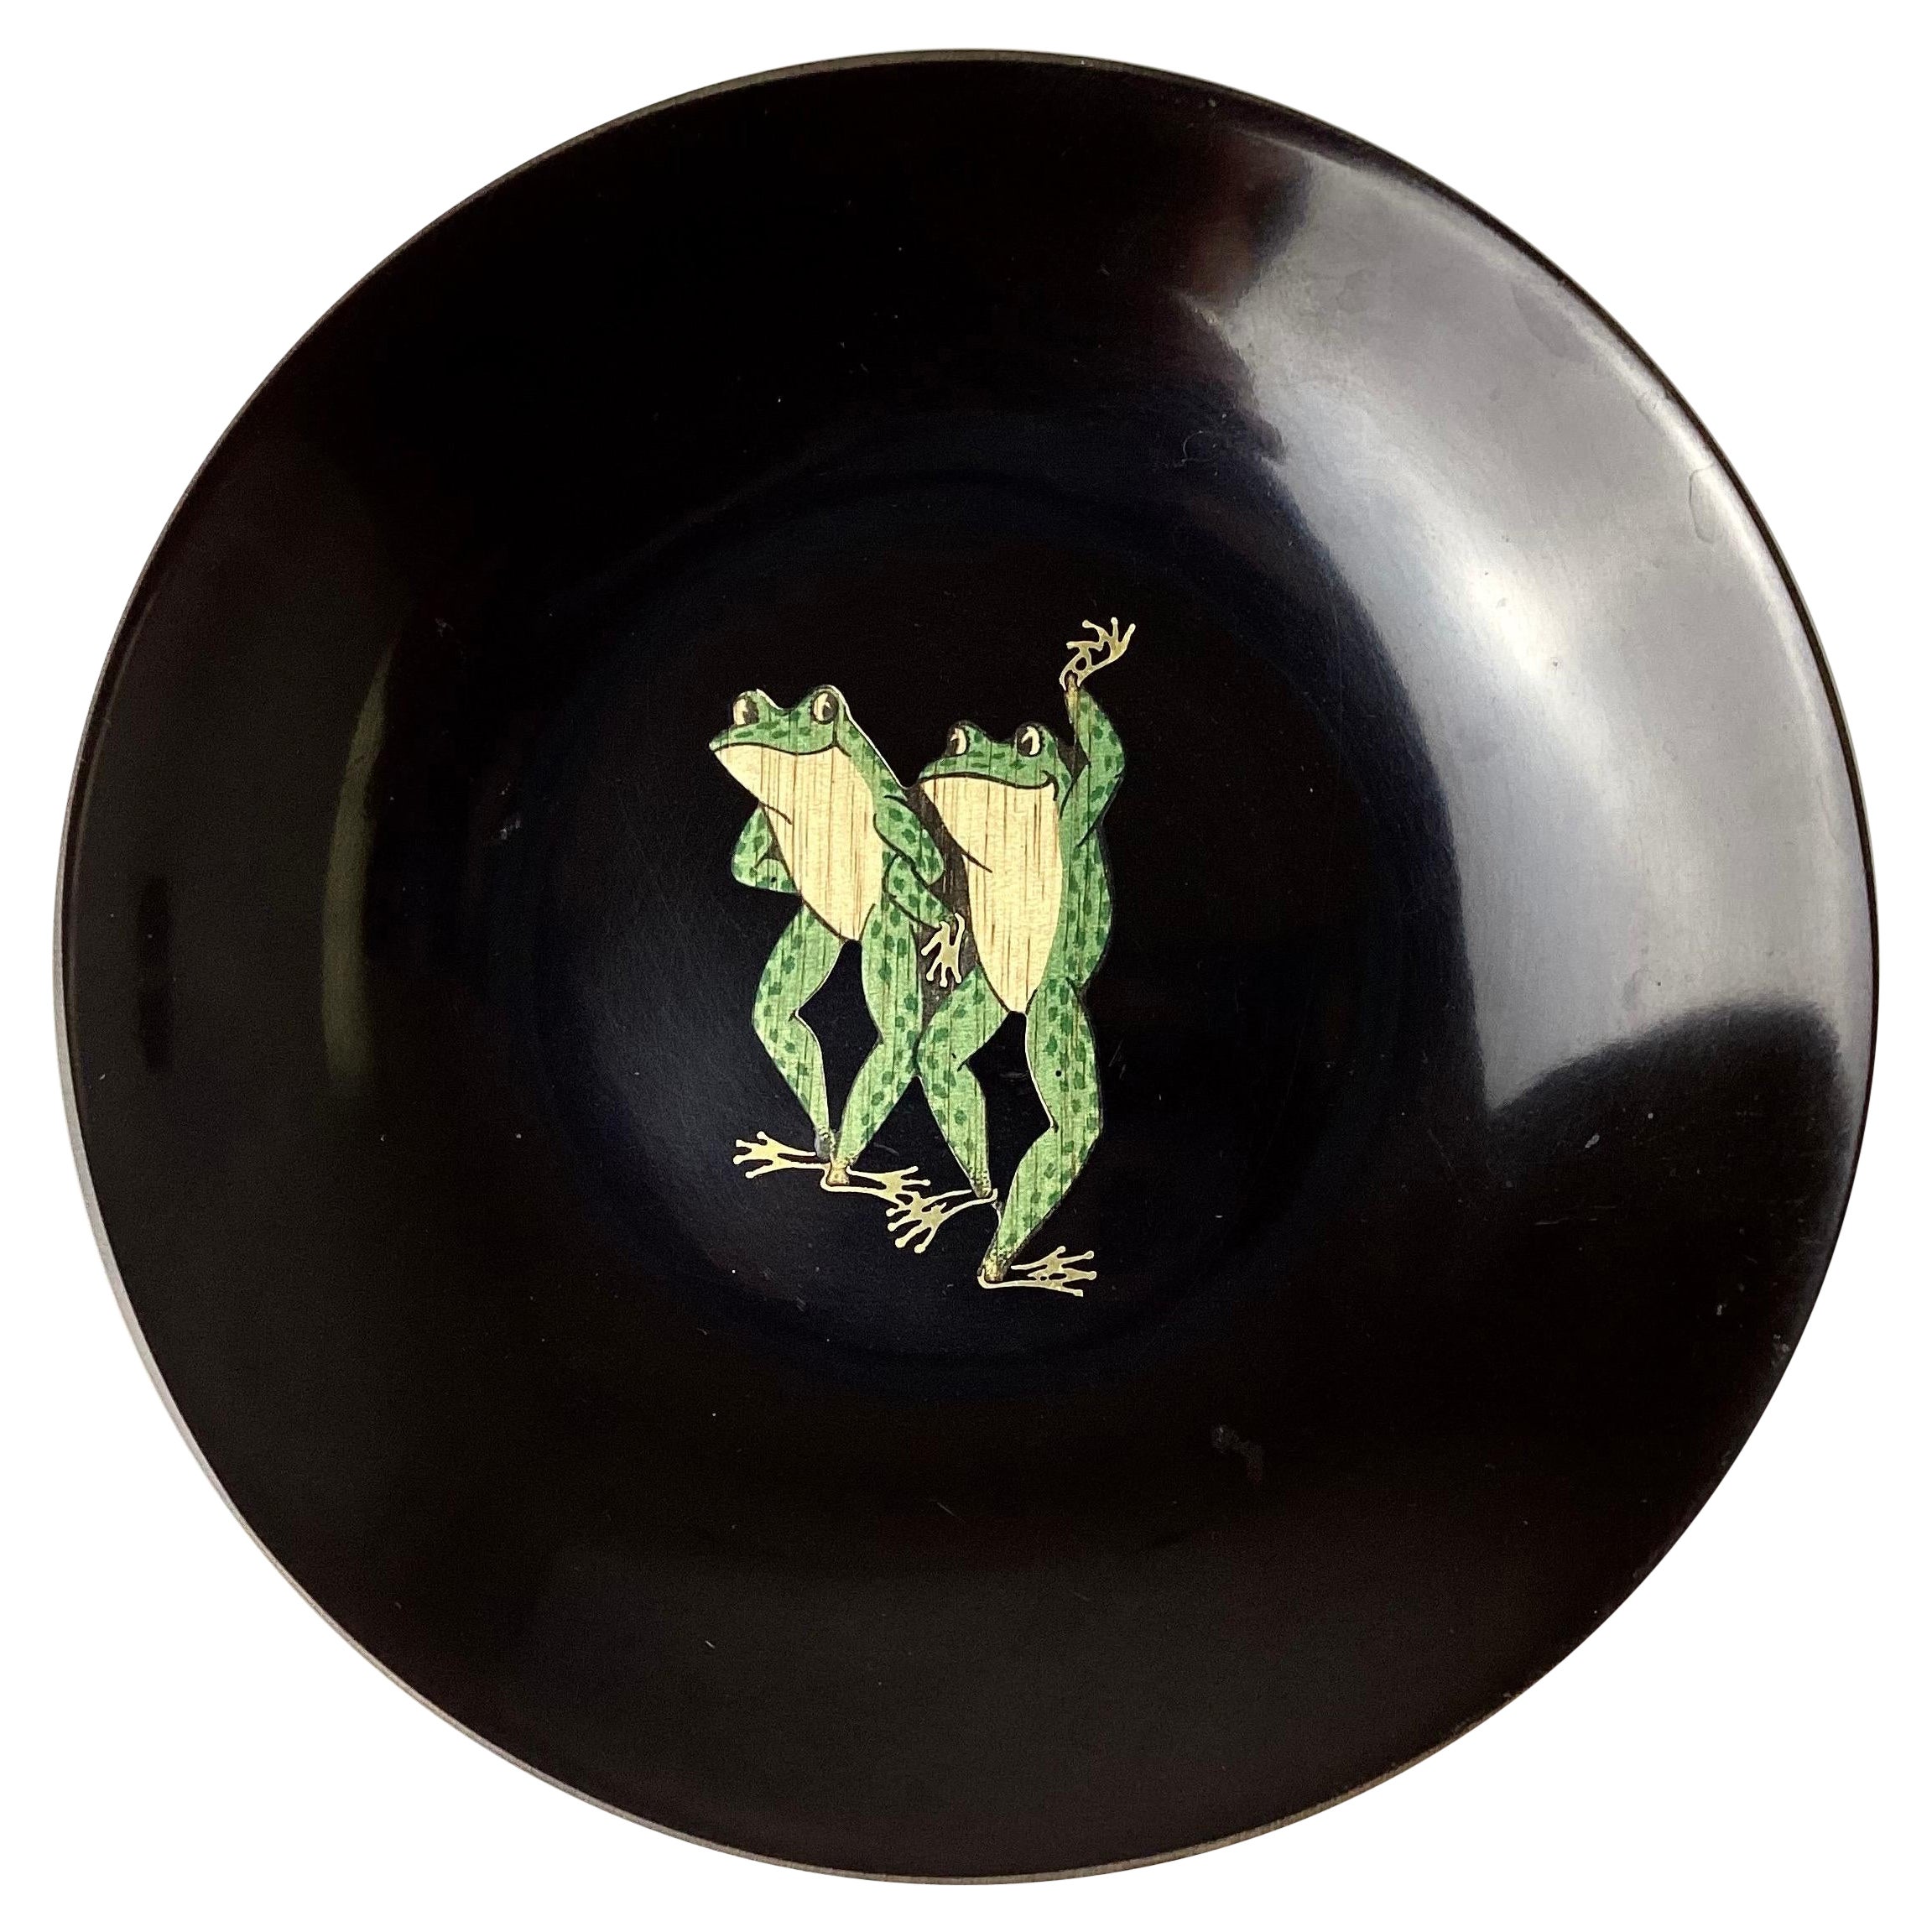 Couroc Bowl with Frogs, Monterey, California 1970s